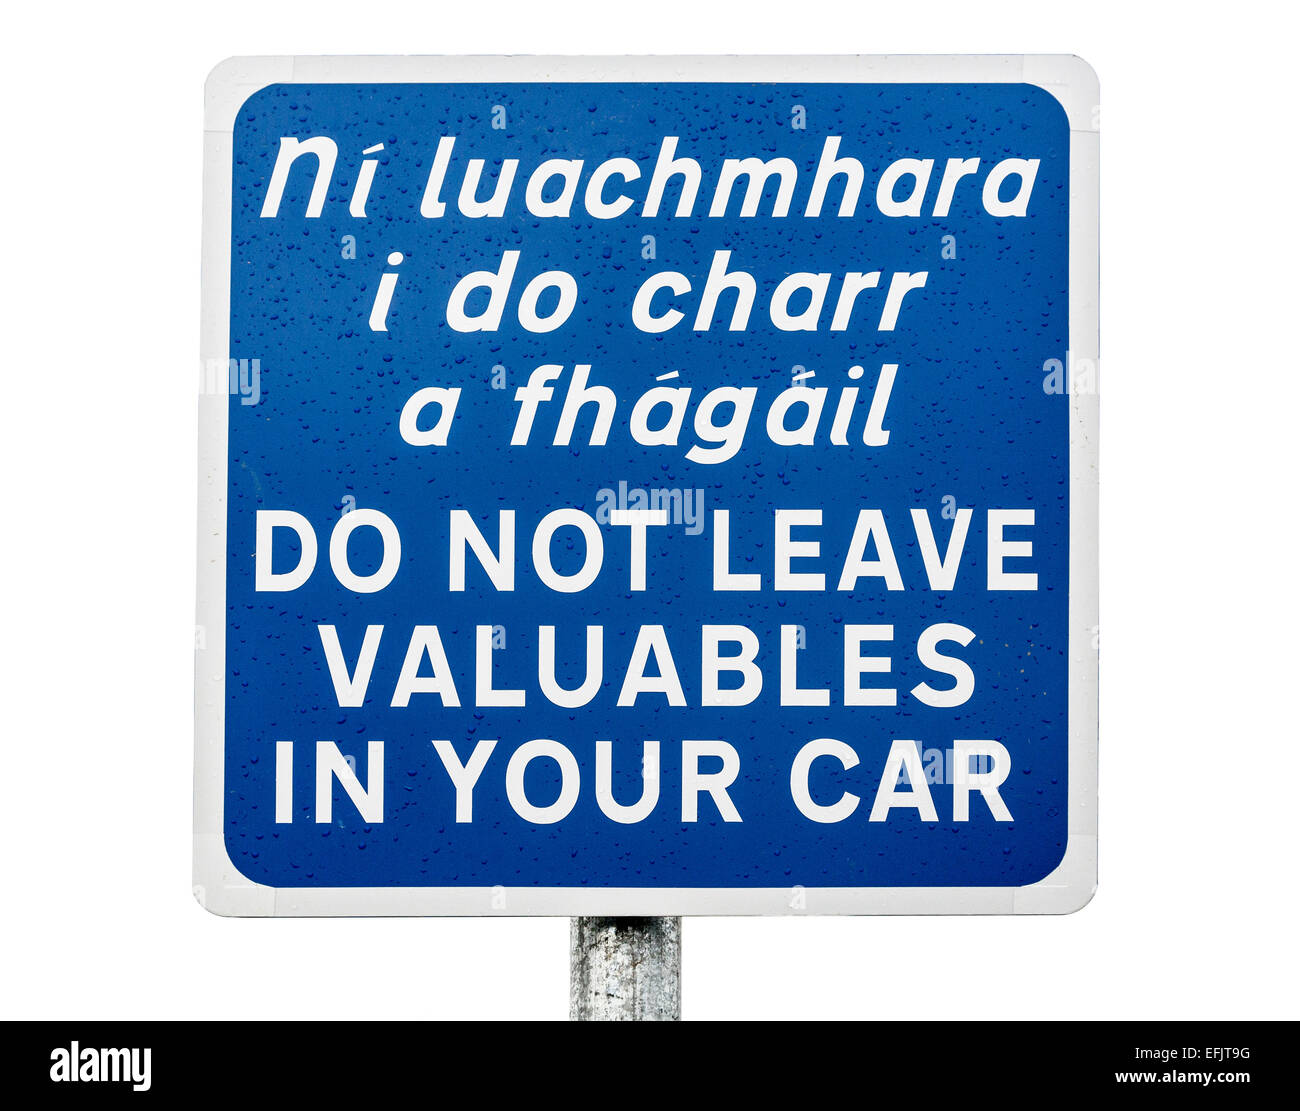 Do not leave valuables in your car warning sign in English and Gaelic, Poulnabrone burial chamber, Burren, Co. Clare, Ireland Stock Photo